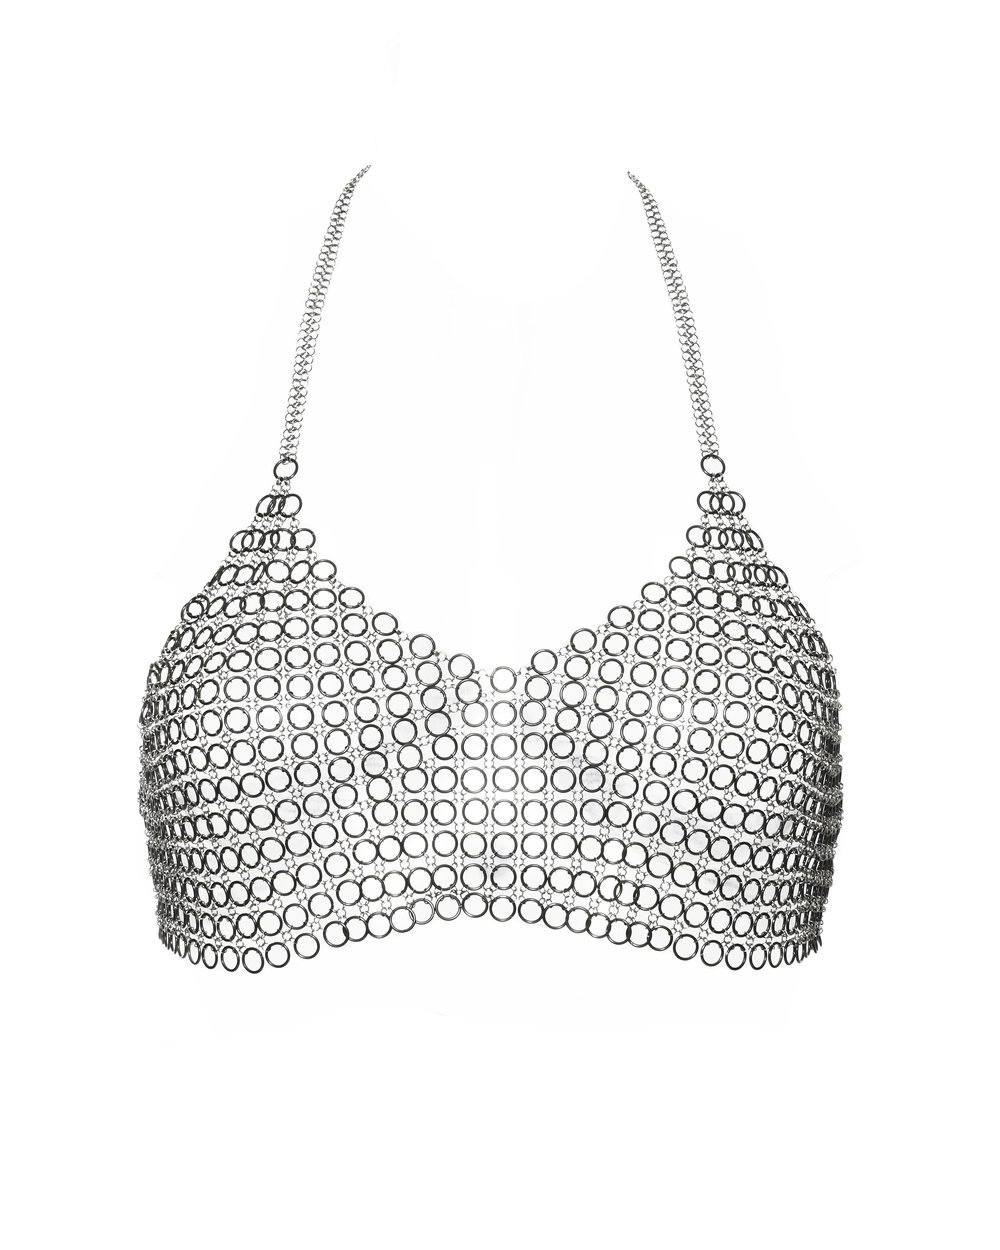 JAPANESE CHAINMAIL TOP — FANNIE SCHIAVONI